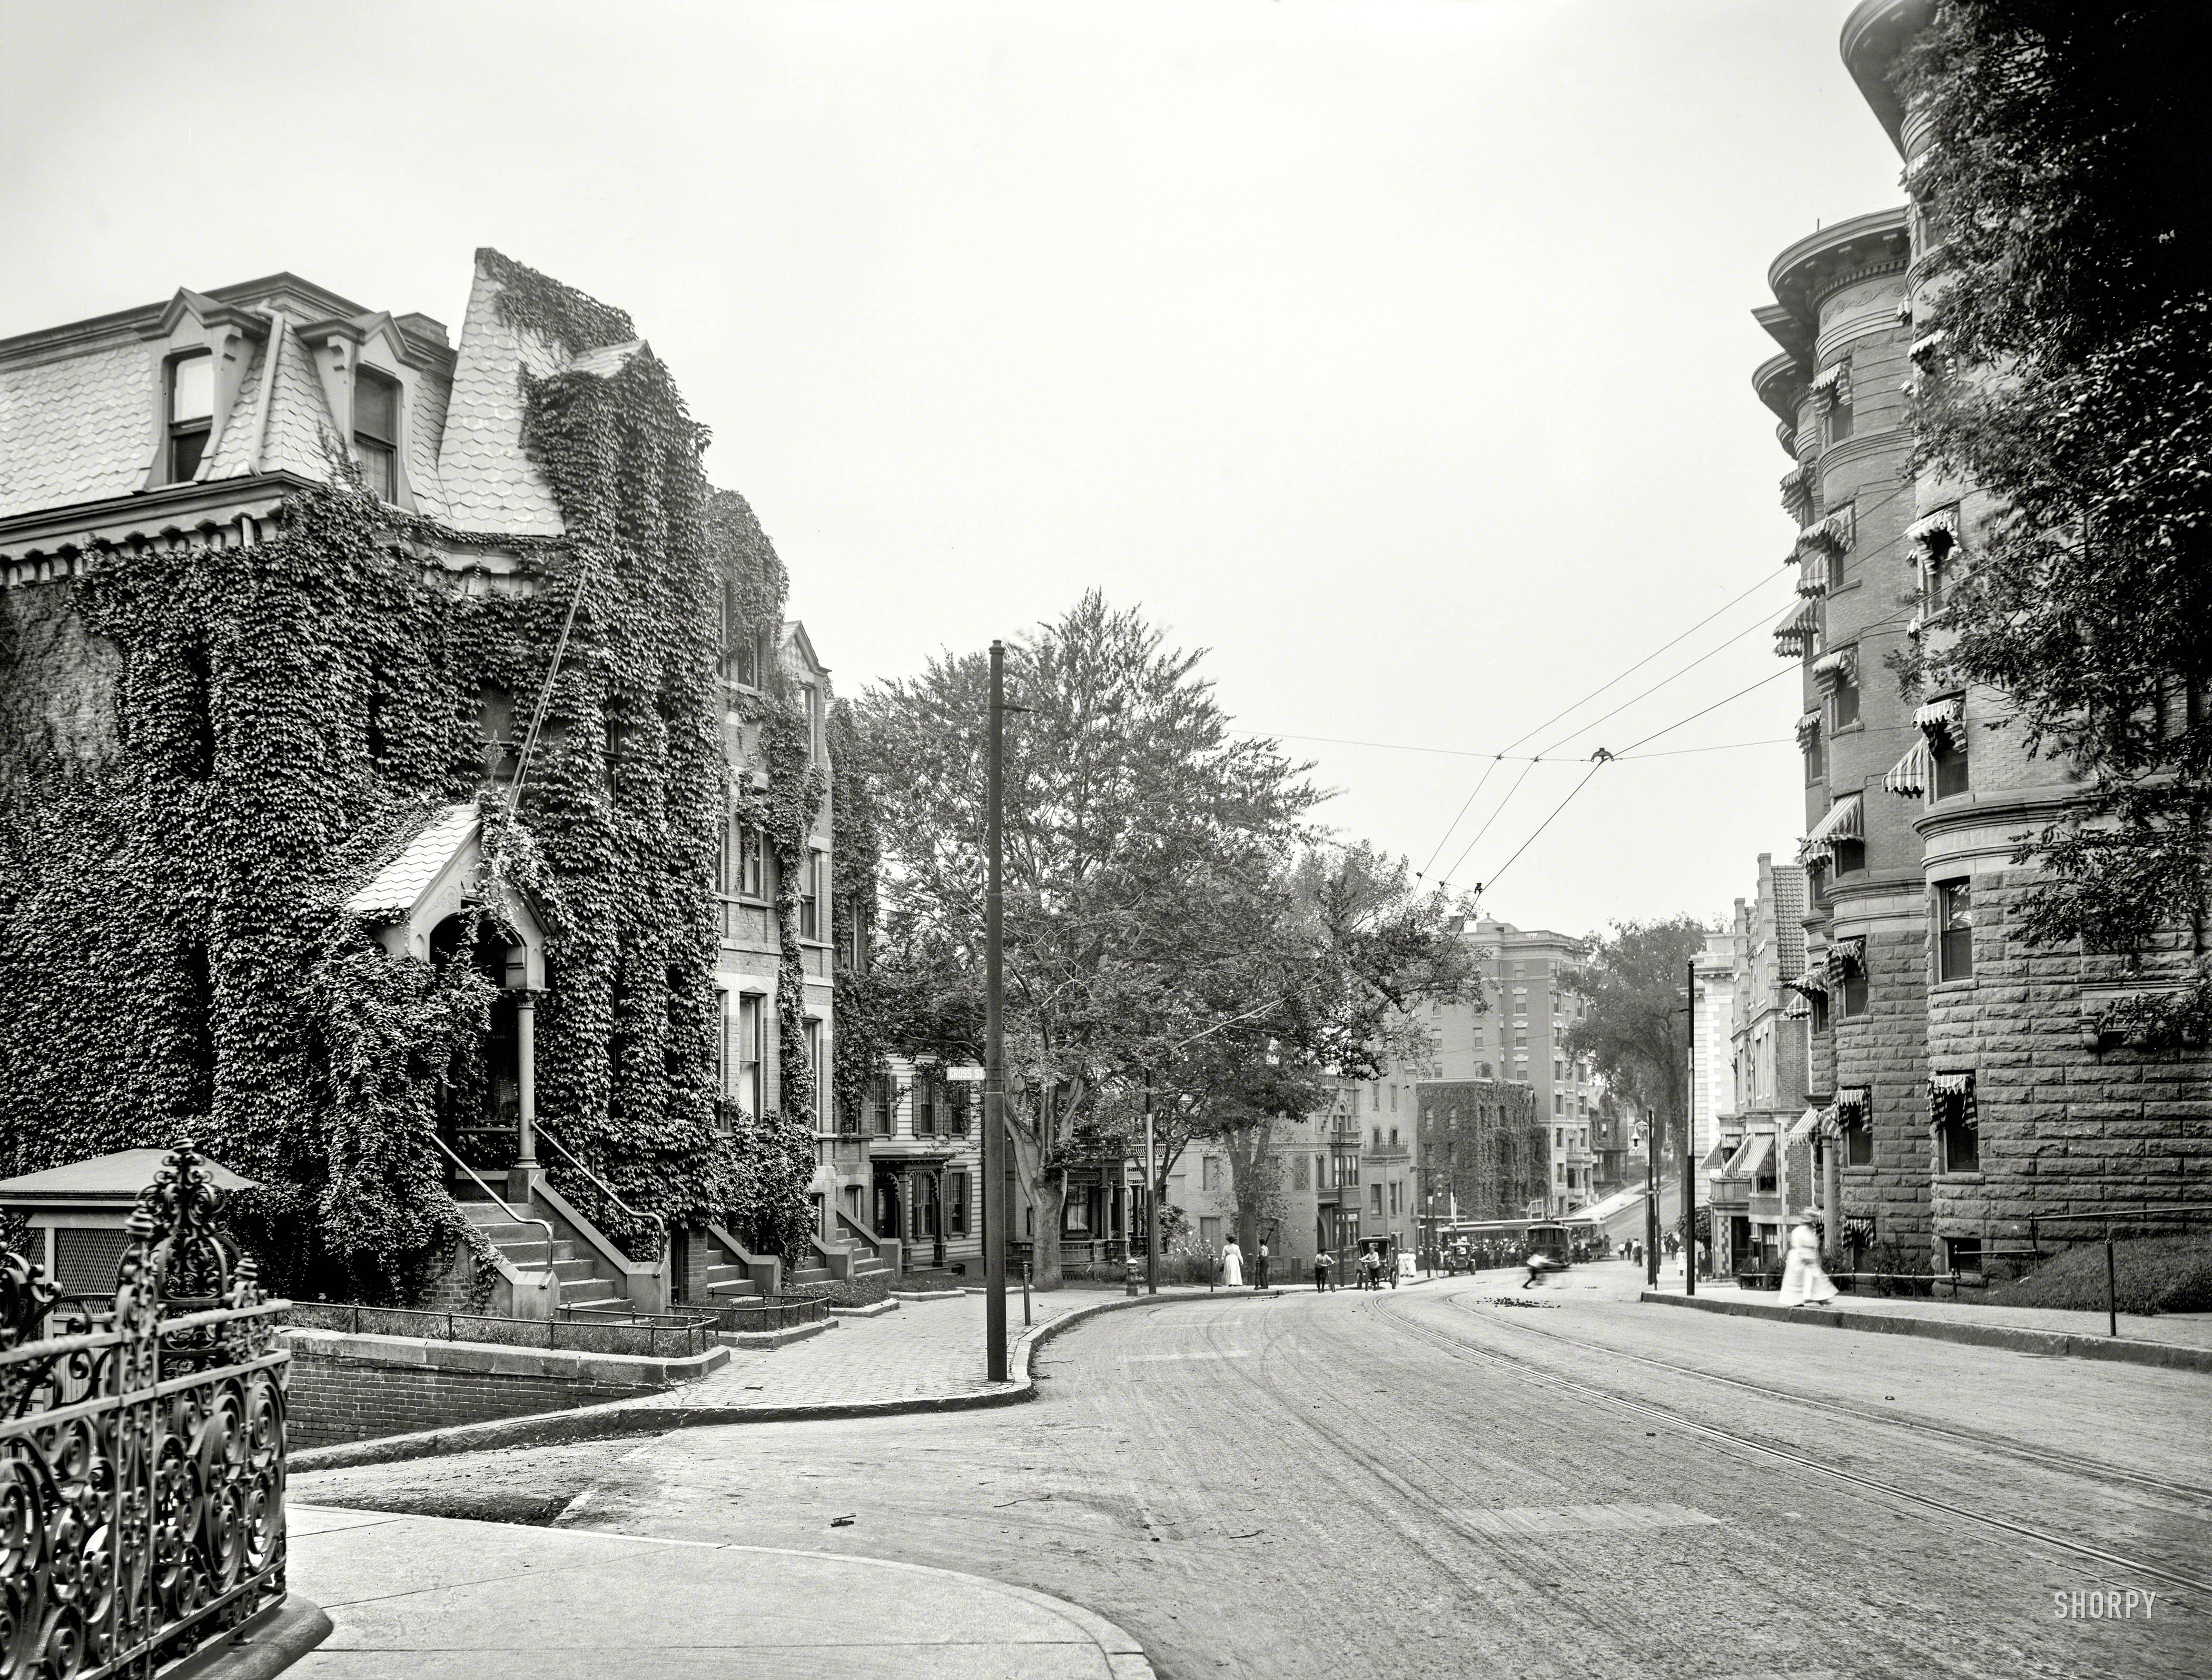 Circa 1910. "Maple Street, Springfield, Mass." Where ivy was evidently quite popular. 8x10 inch glass negative, Detroit Publishing Company. View full size.